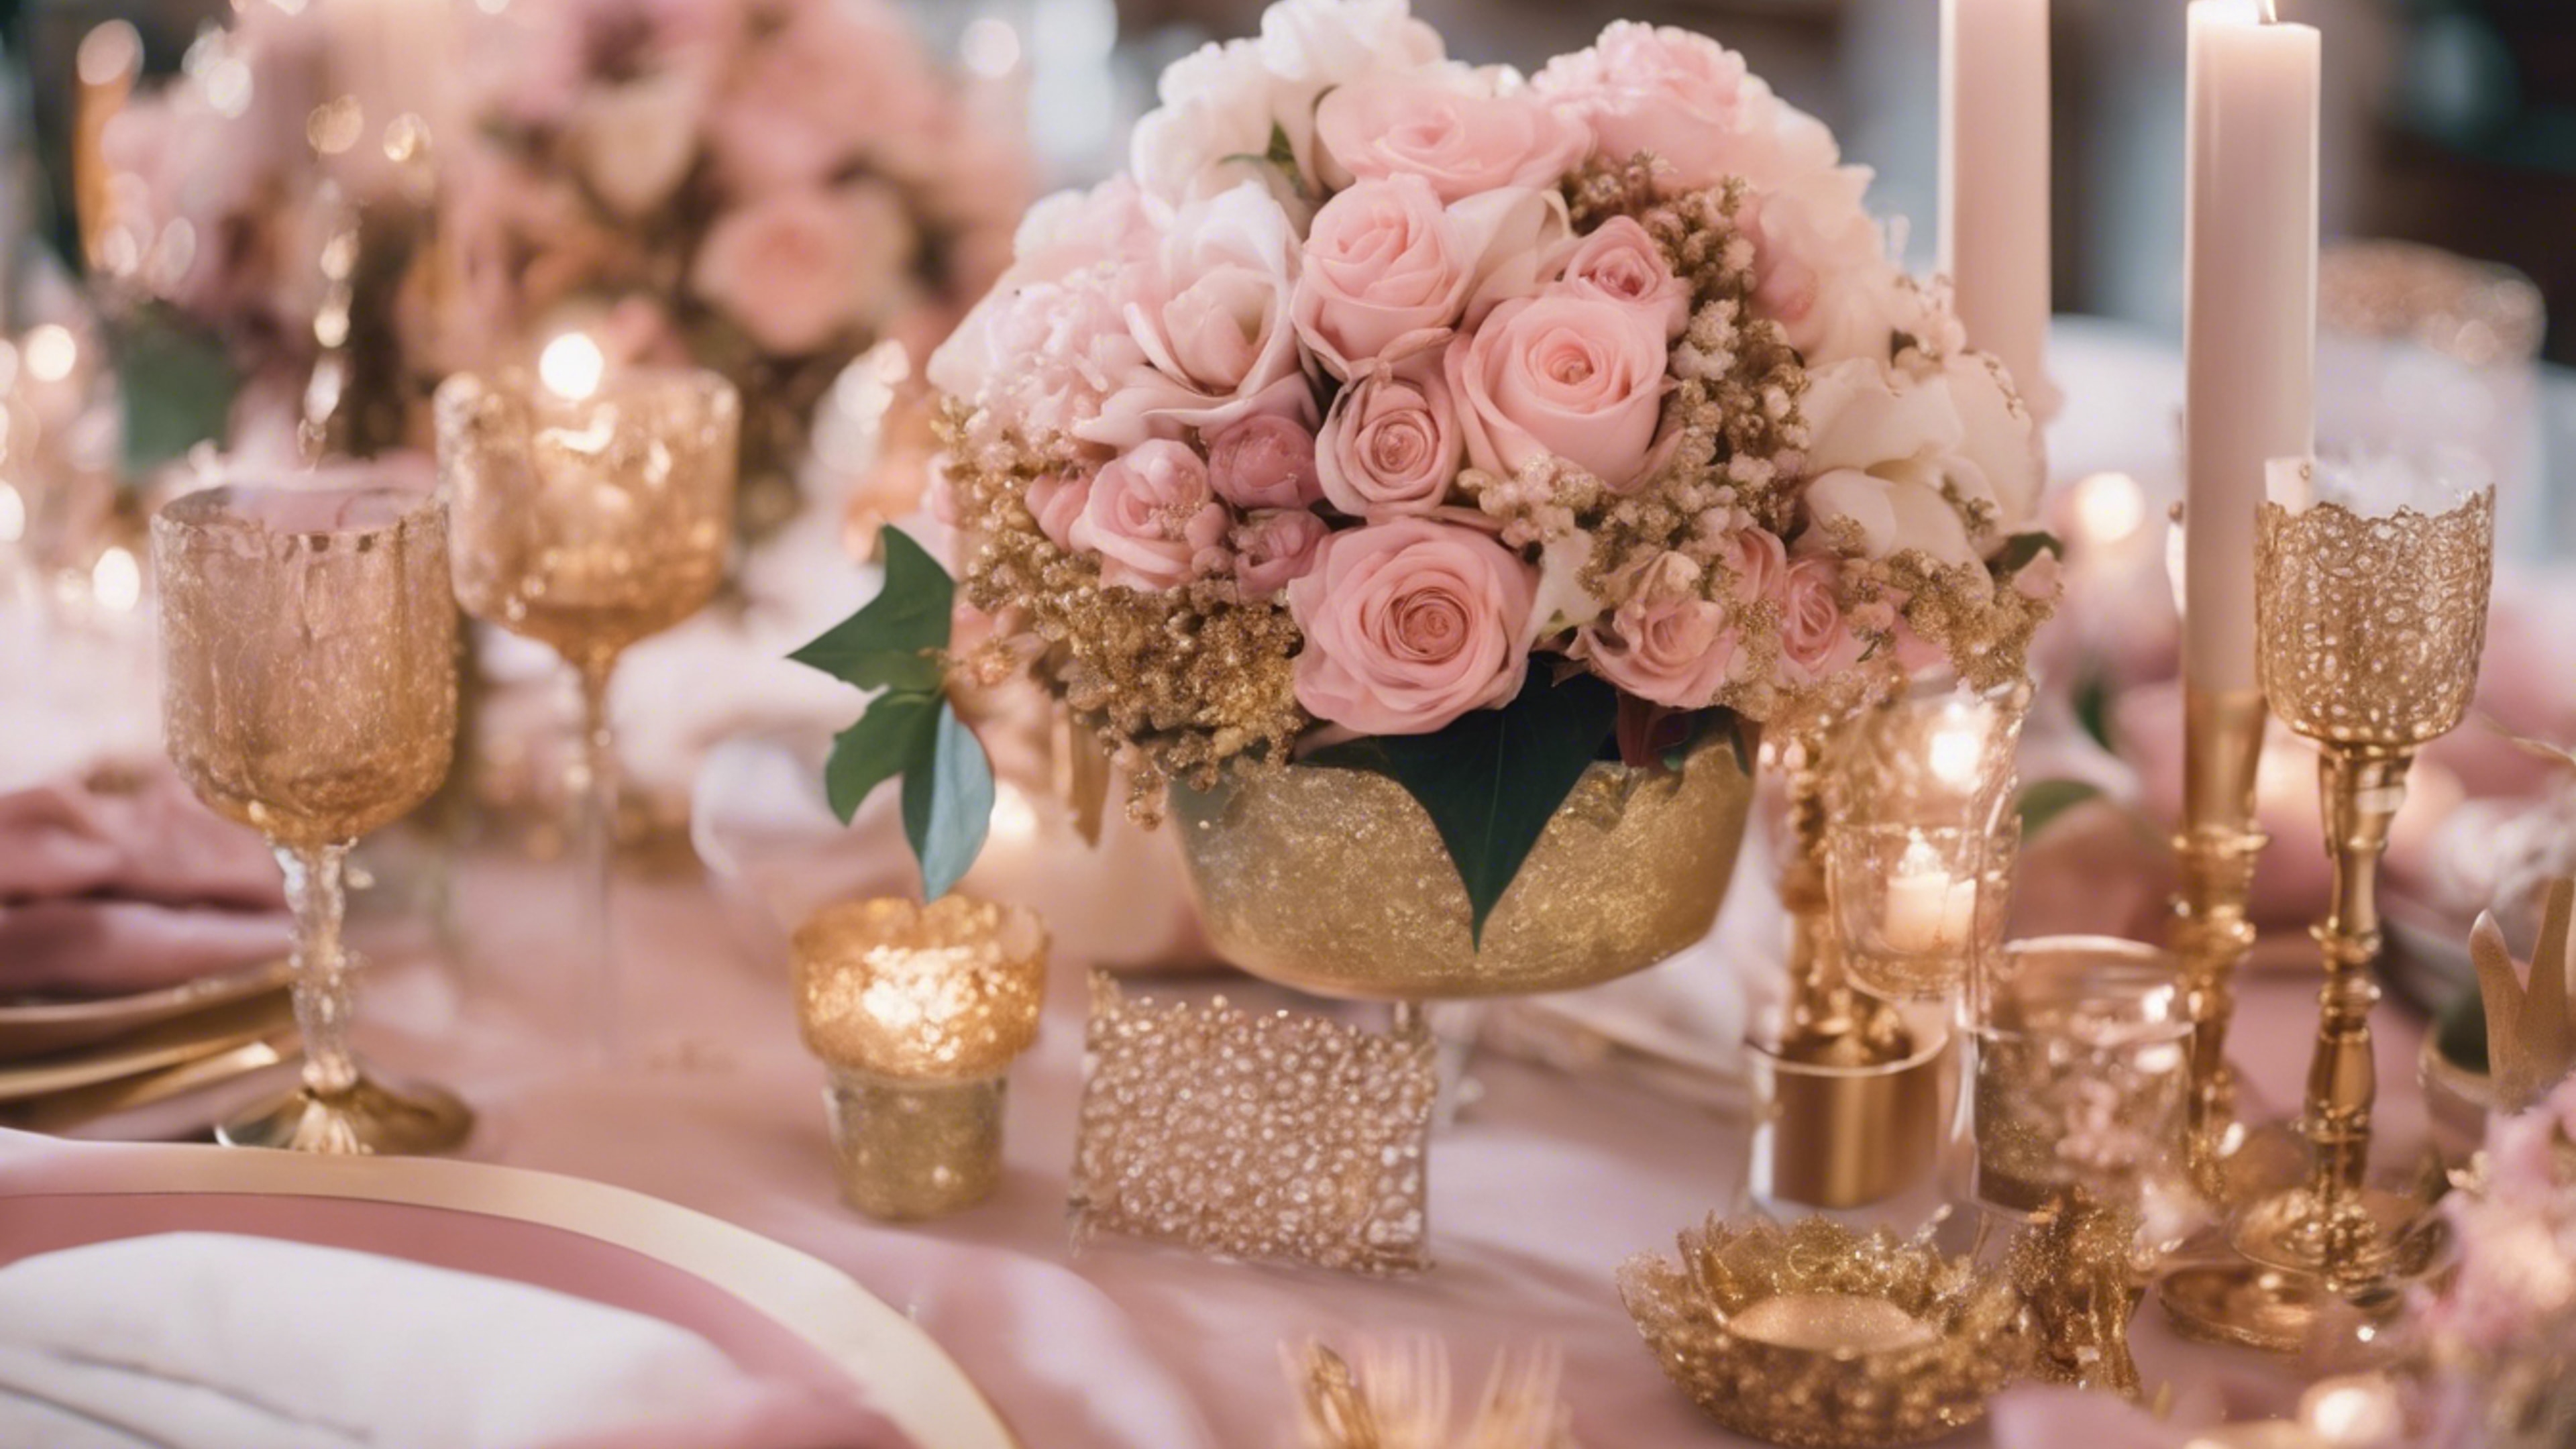 An ethereal pink and gold themed wedding decorations with flowers and metallic accents. Wallpaper[814998f188fb45f48f1c]